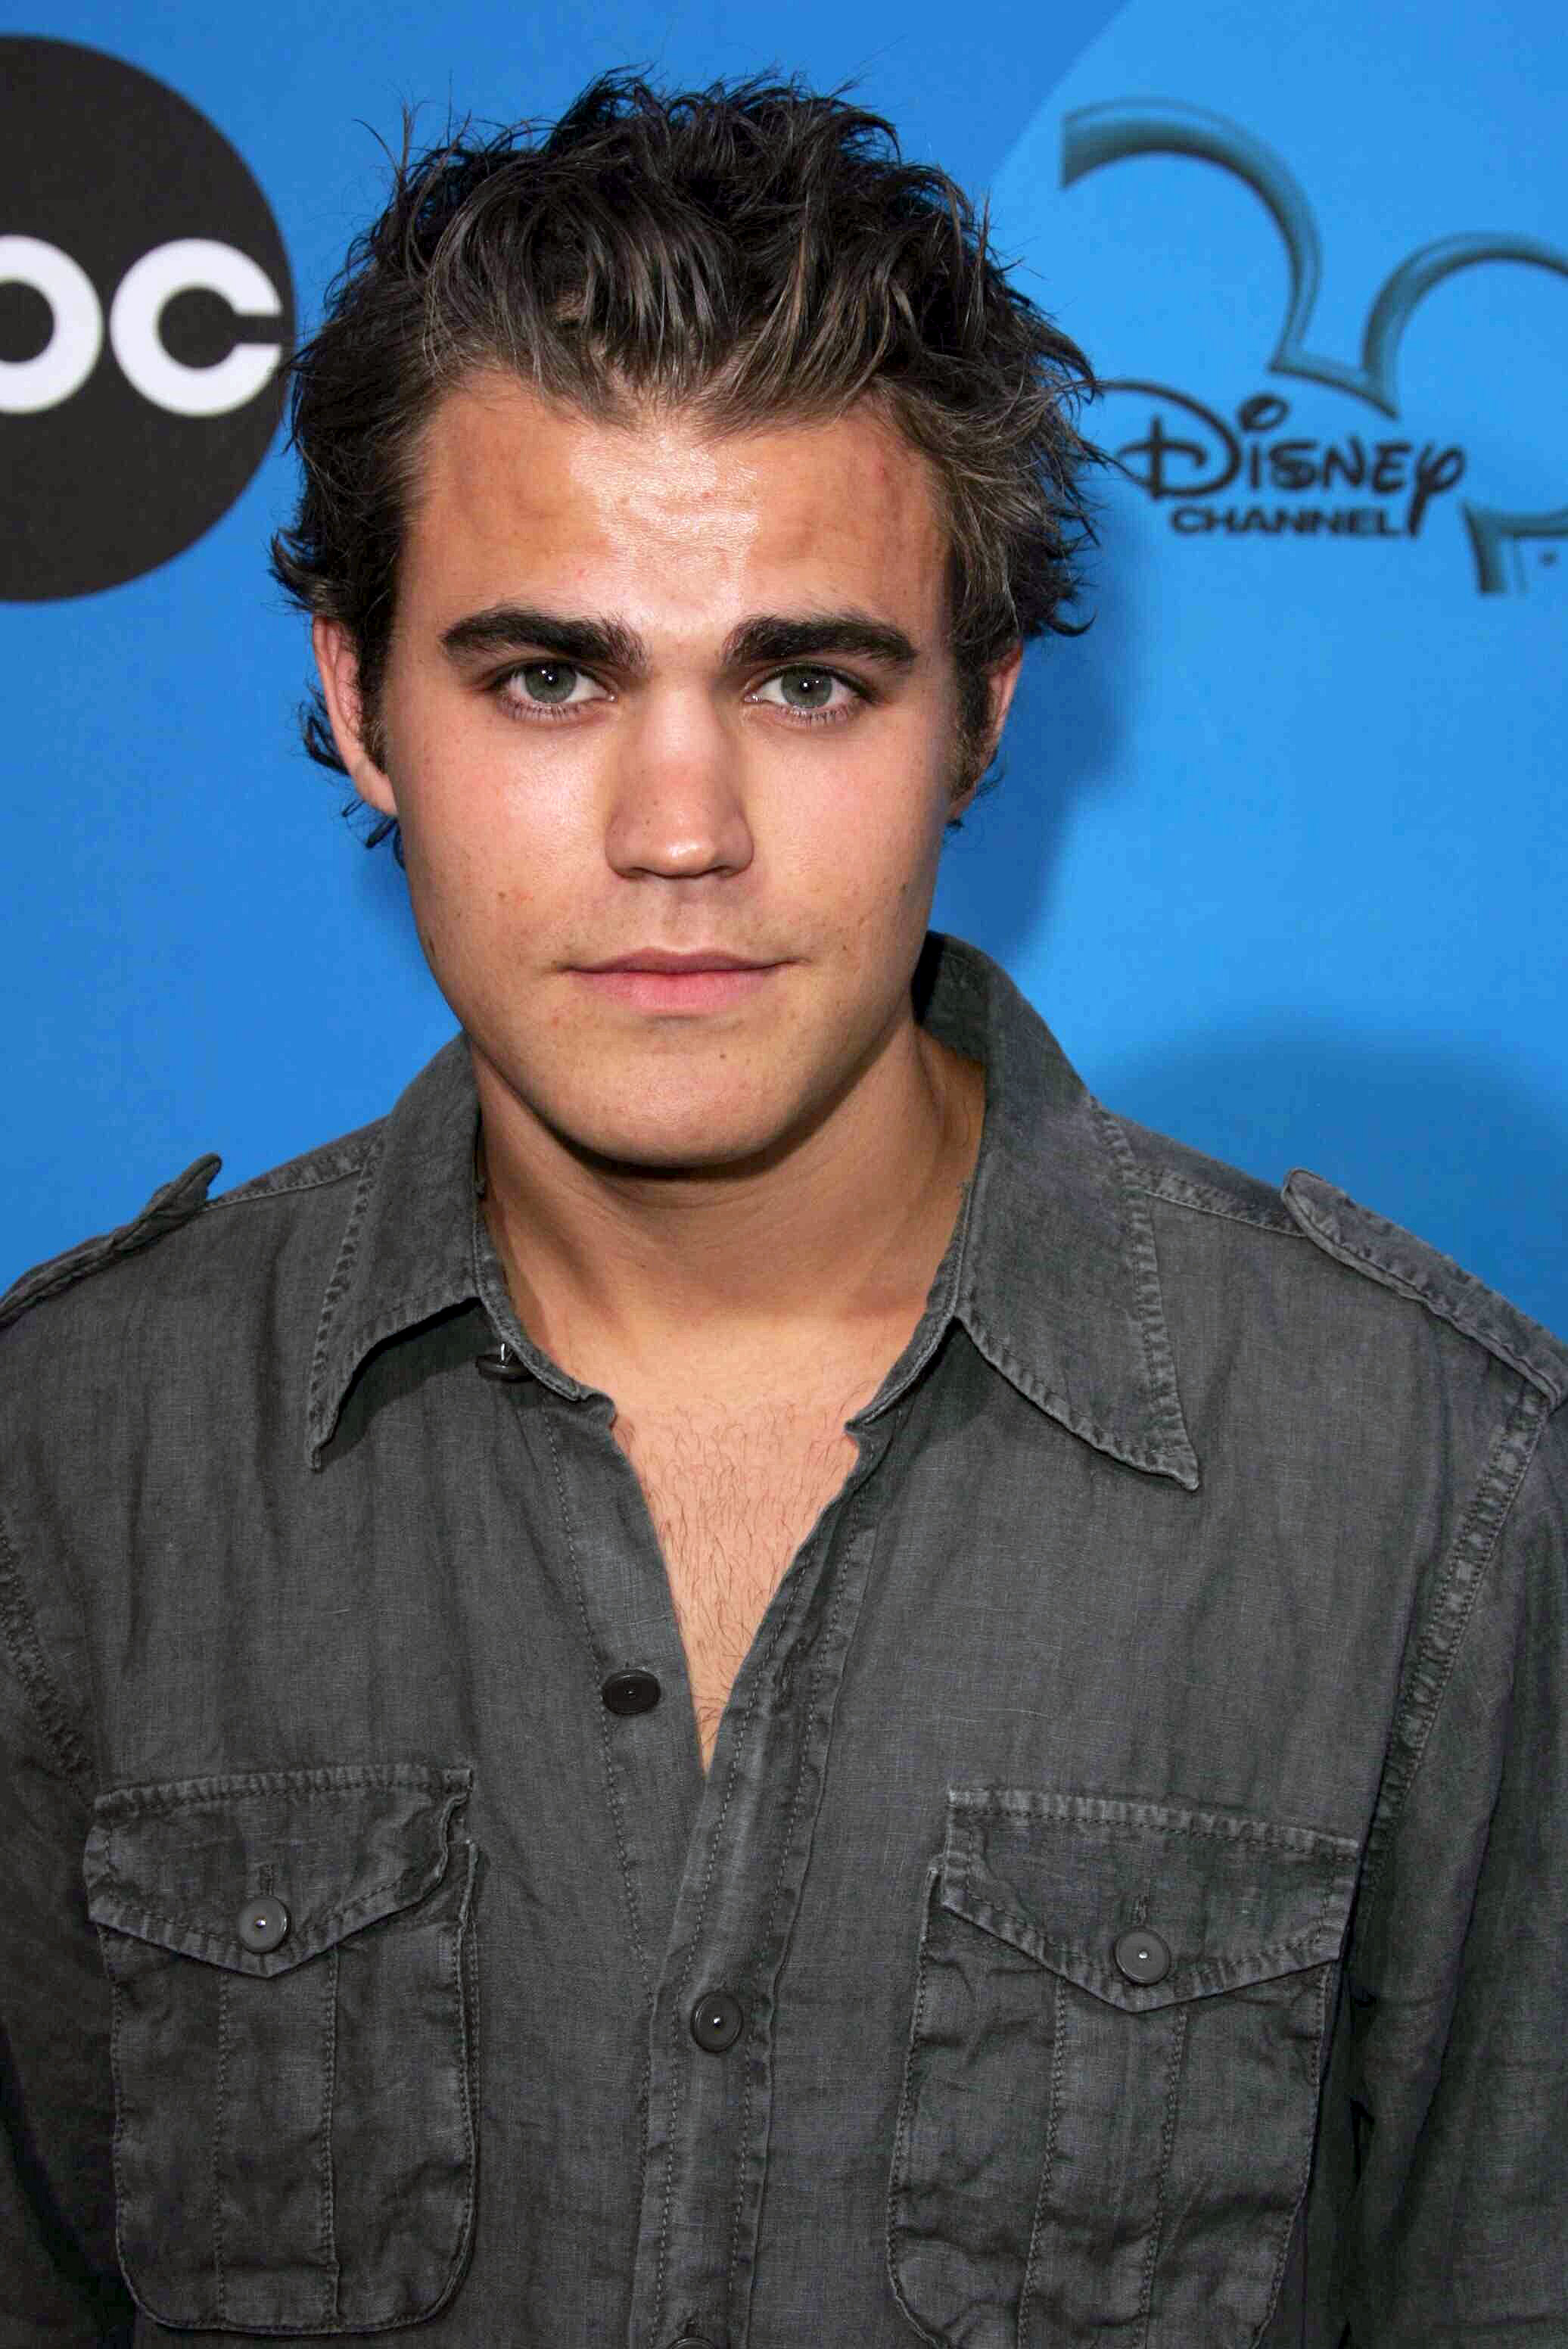 Paul Wesley's Transformation From 'Vampire Diaries' to Now: Photos